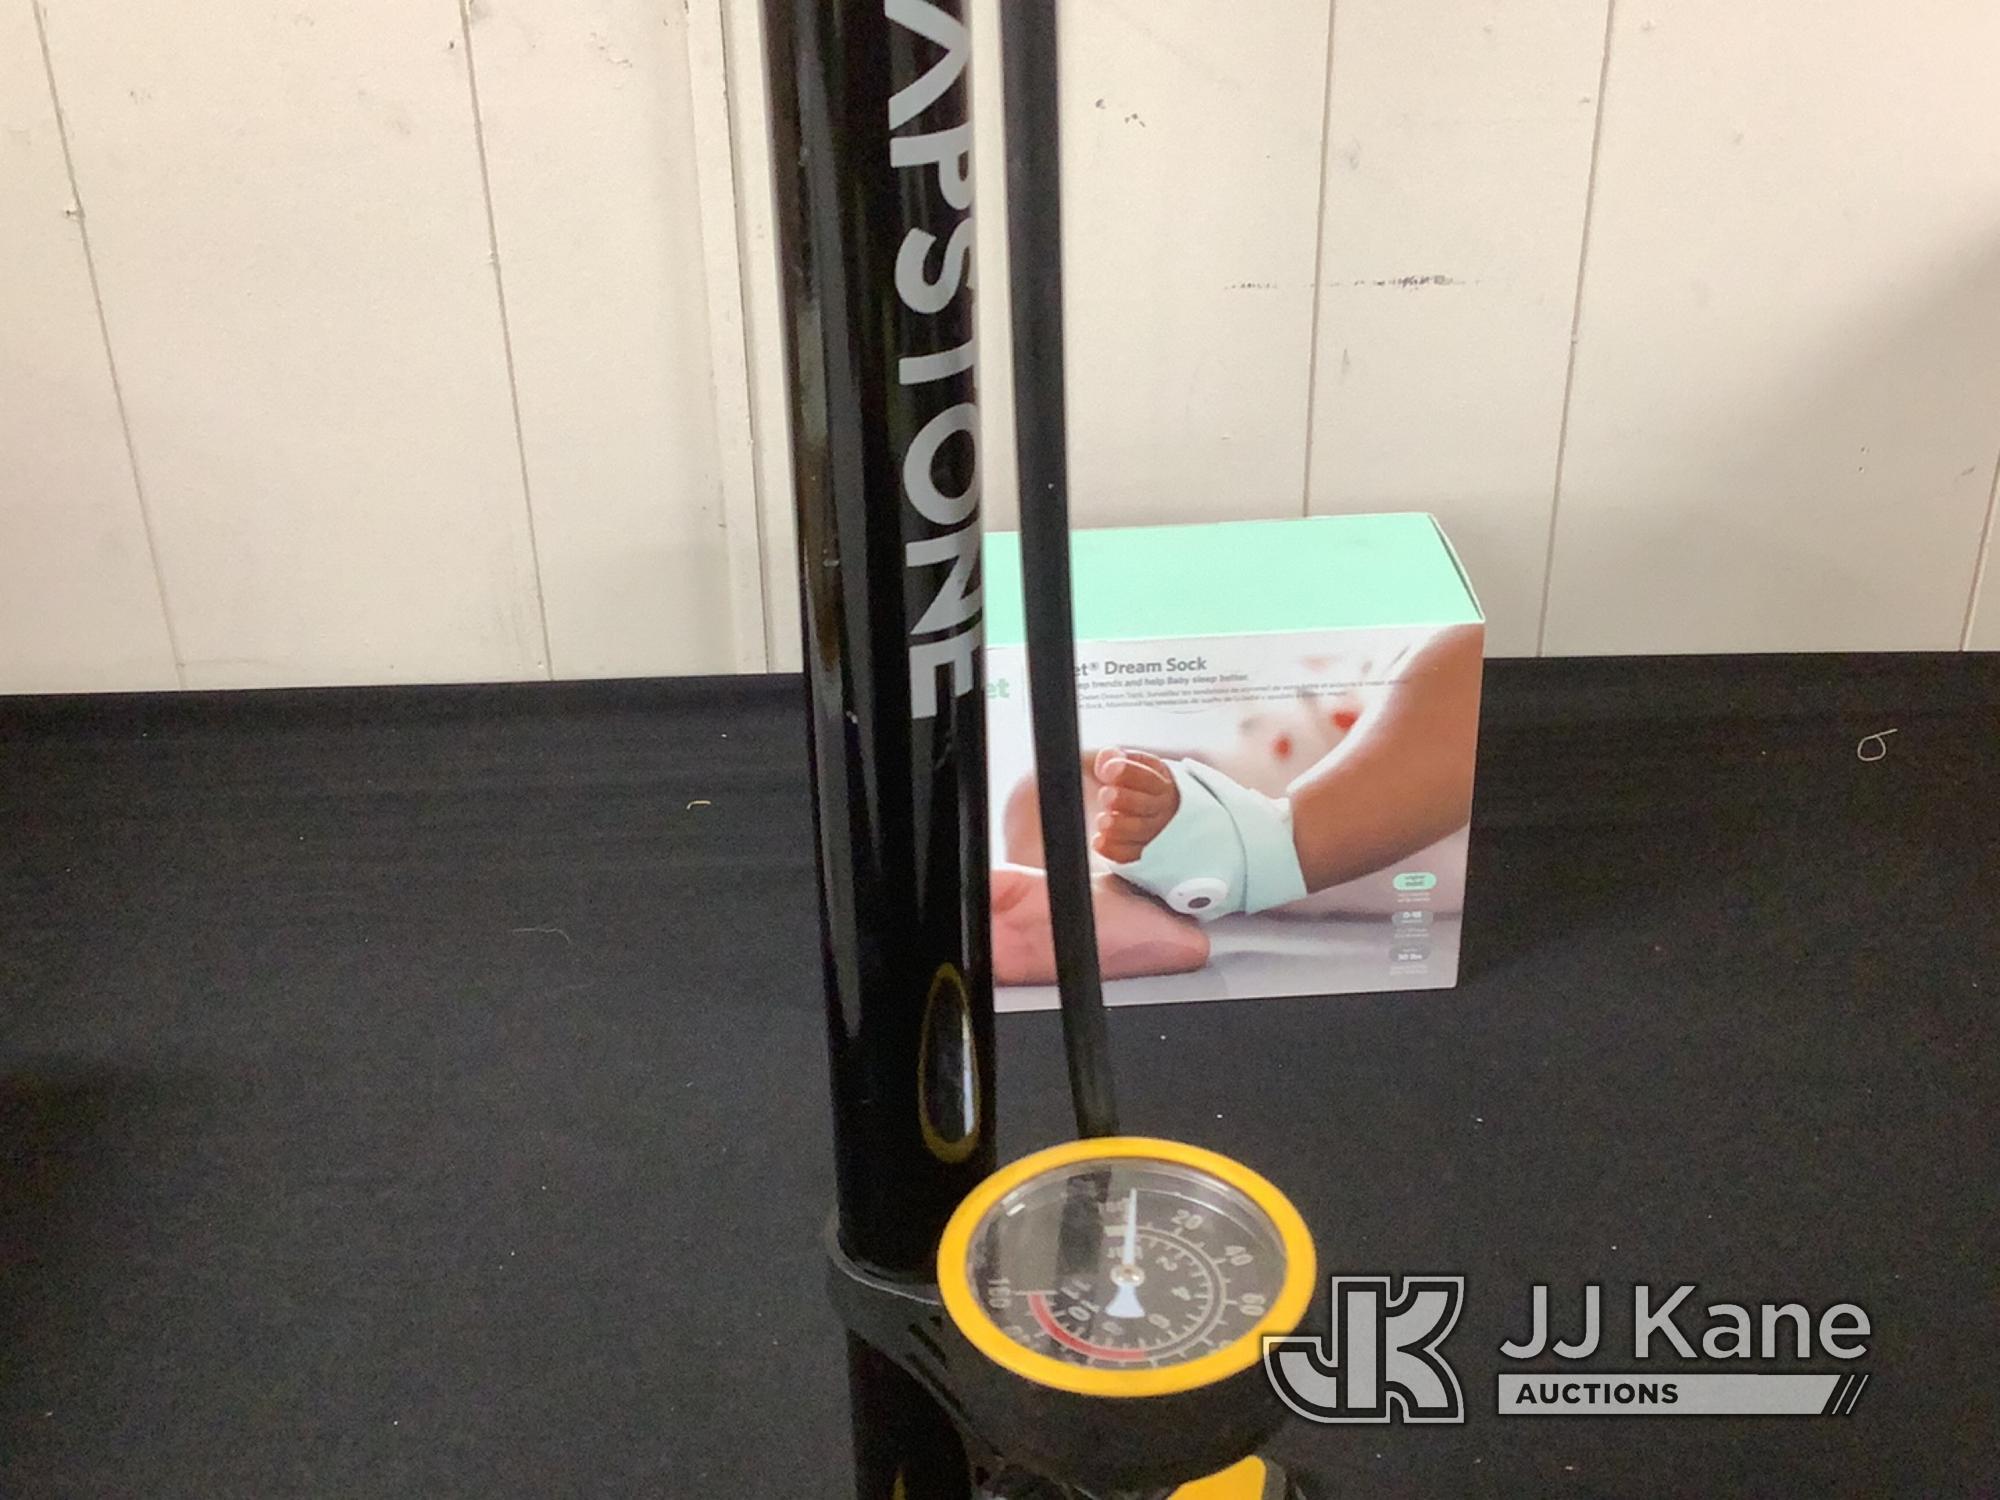 (Jurupa Valley, CA) Boots | bike pump | owlet | straightening comb (New) NOTE: This unit is being so